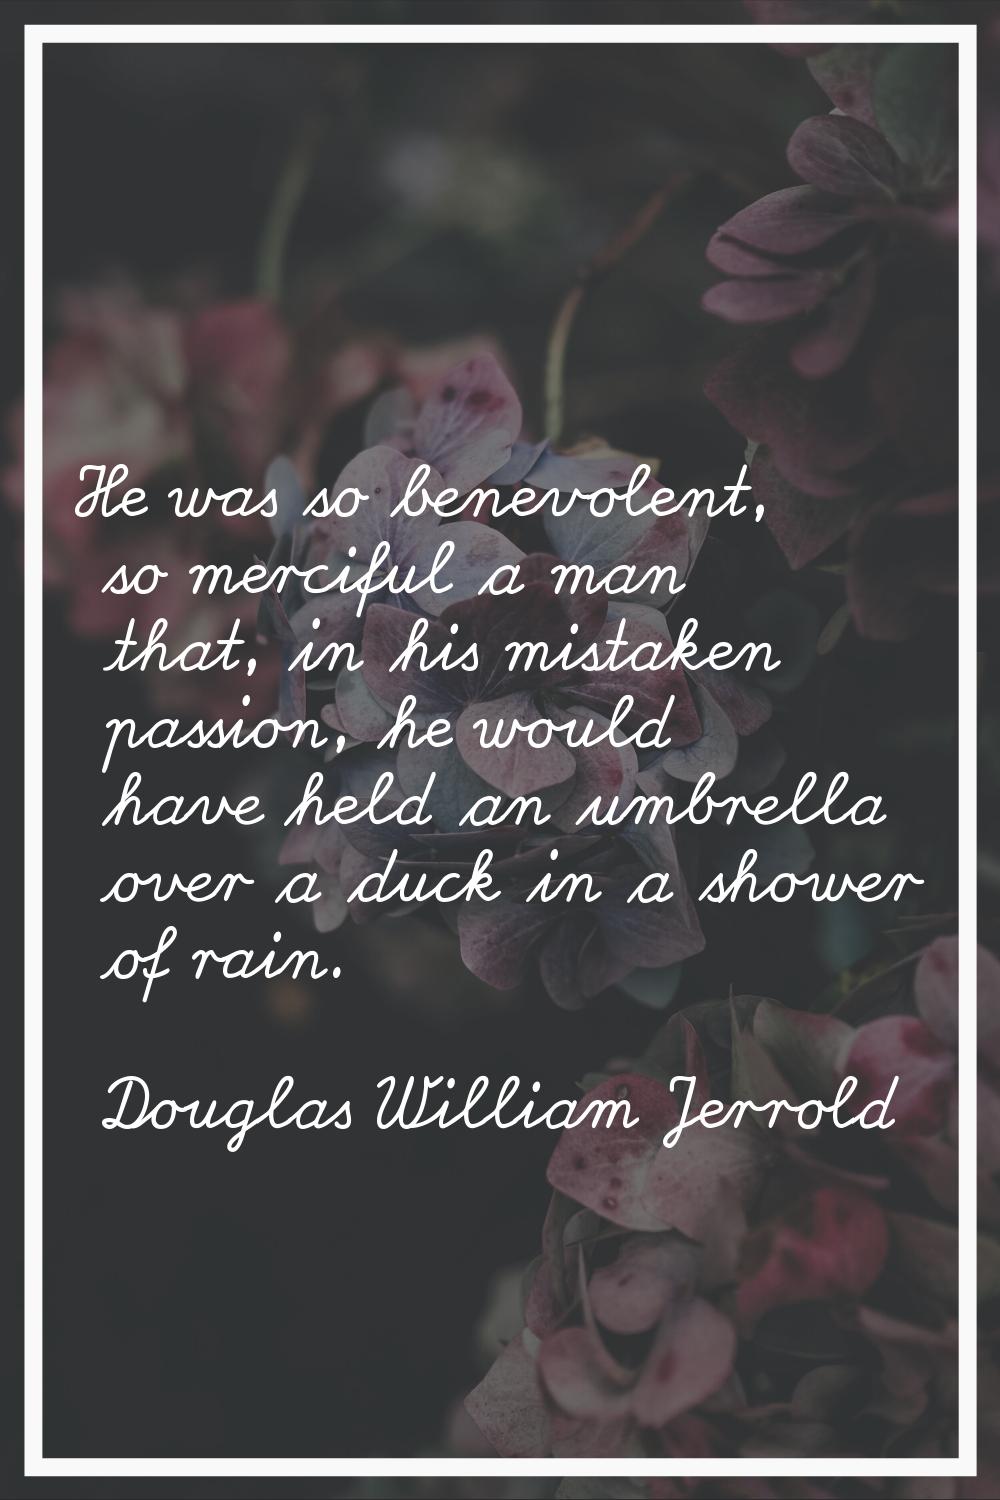 He was so benevolent, so merciful a man that, in his mistaken passion, he would have held an umbrel